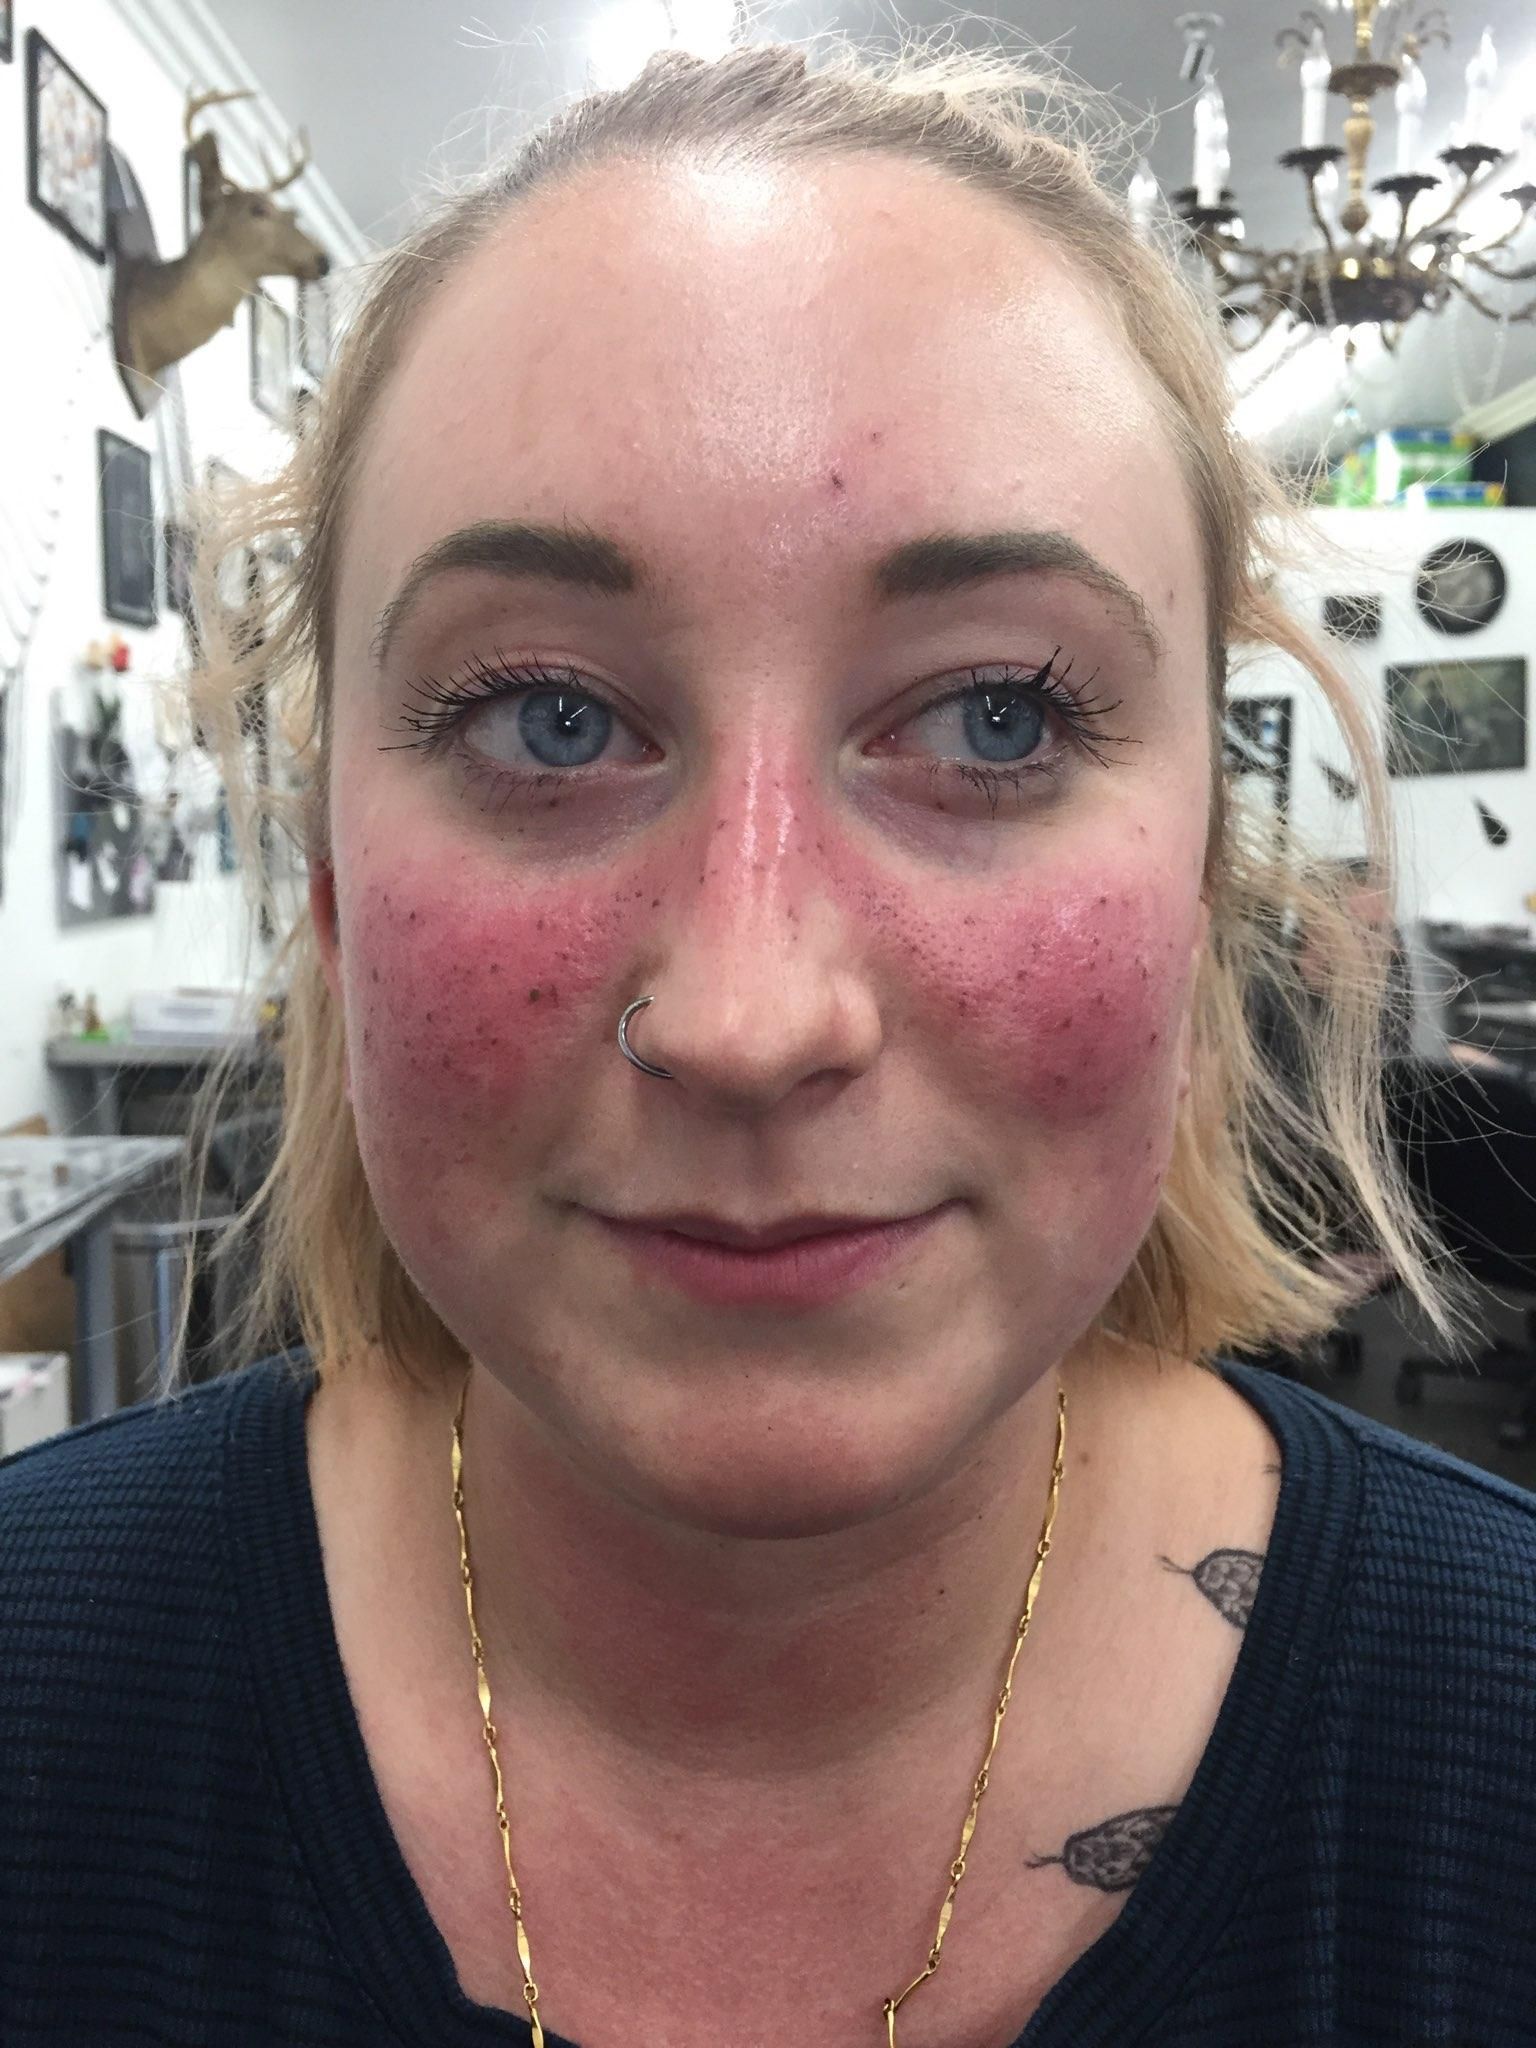 This Beauty Trend Has A Tattooist Blade Freckles Onto The Patients Face  All Inspired By Meghan Markle  Media Drum World